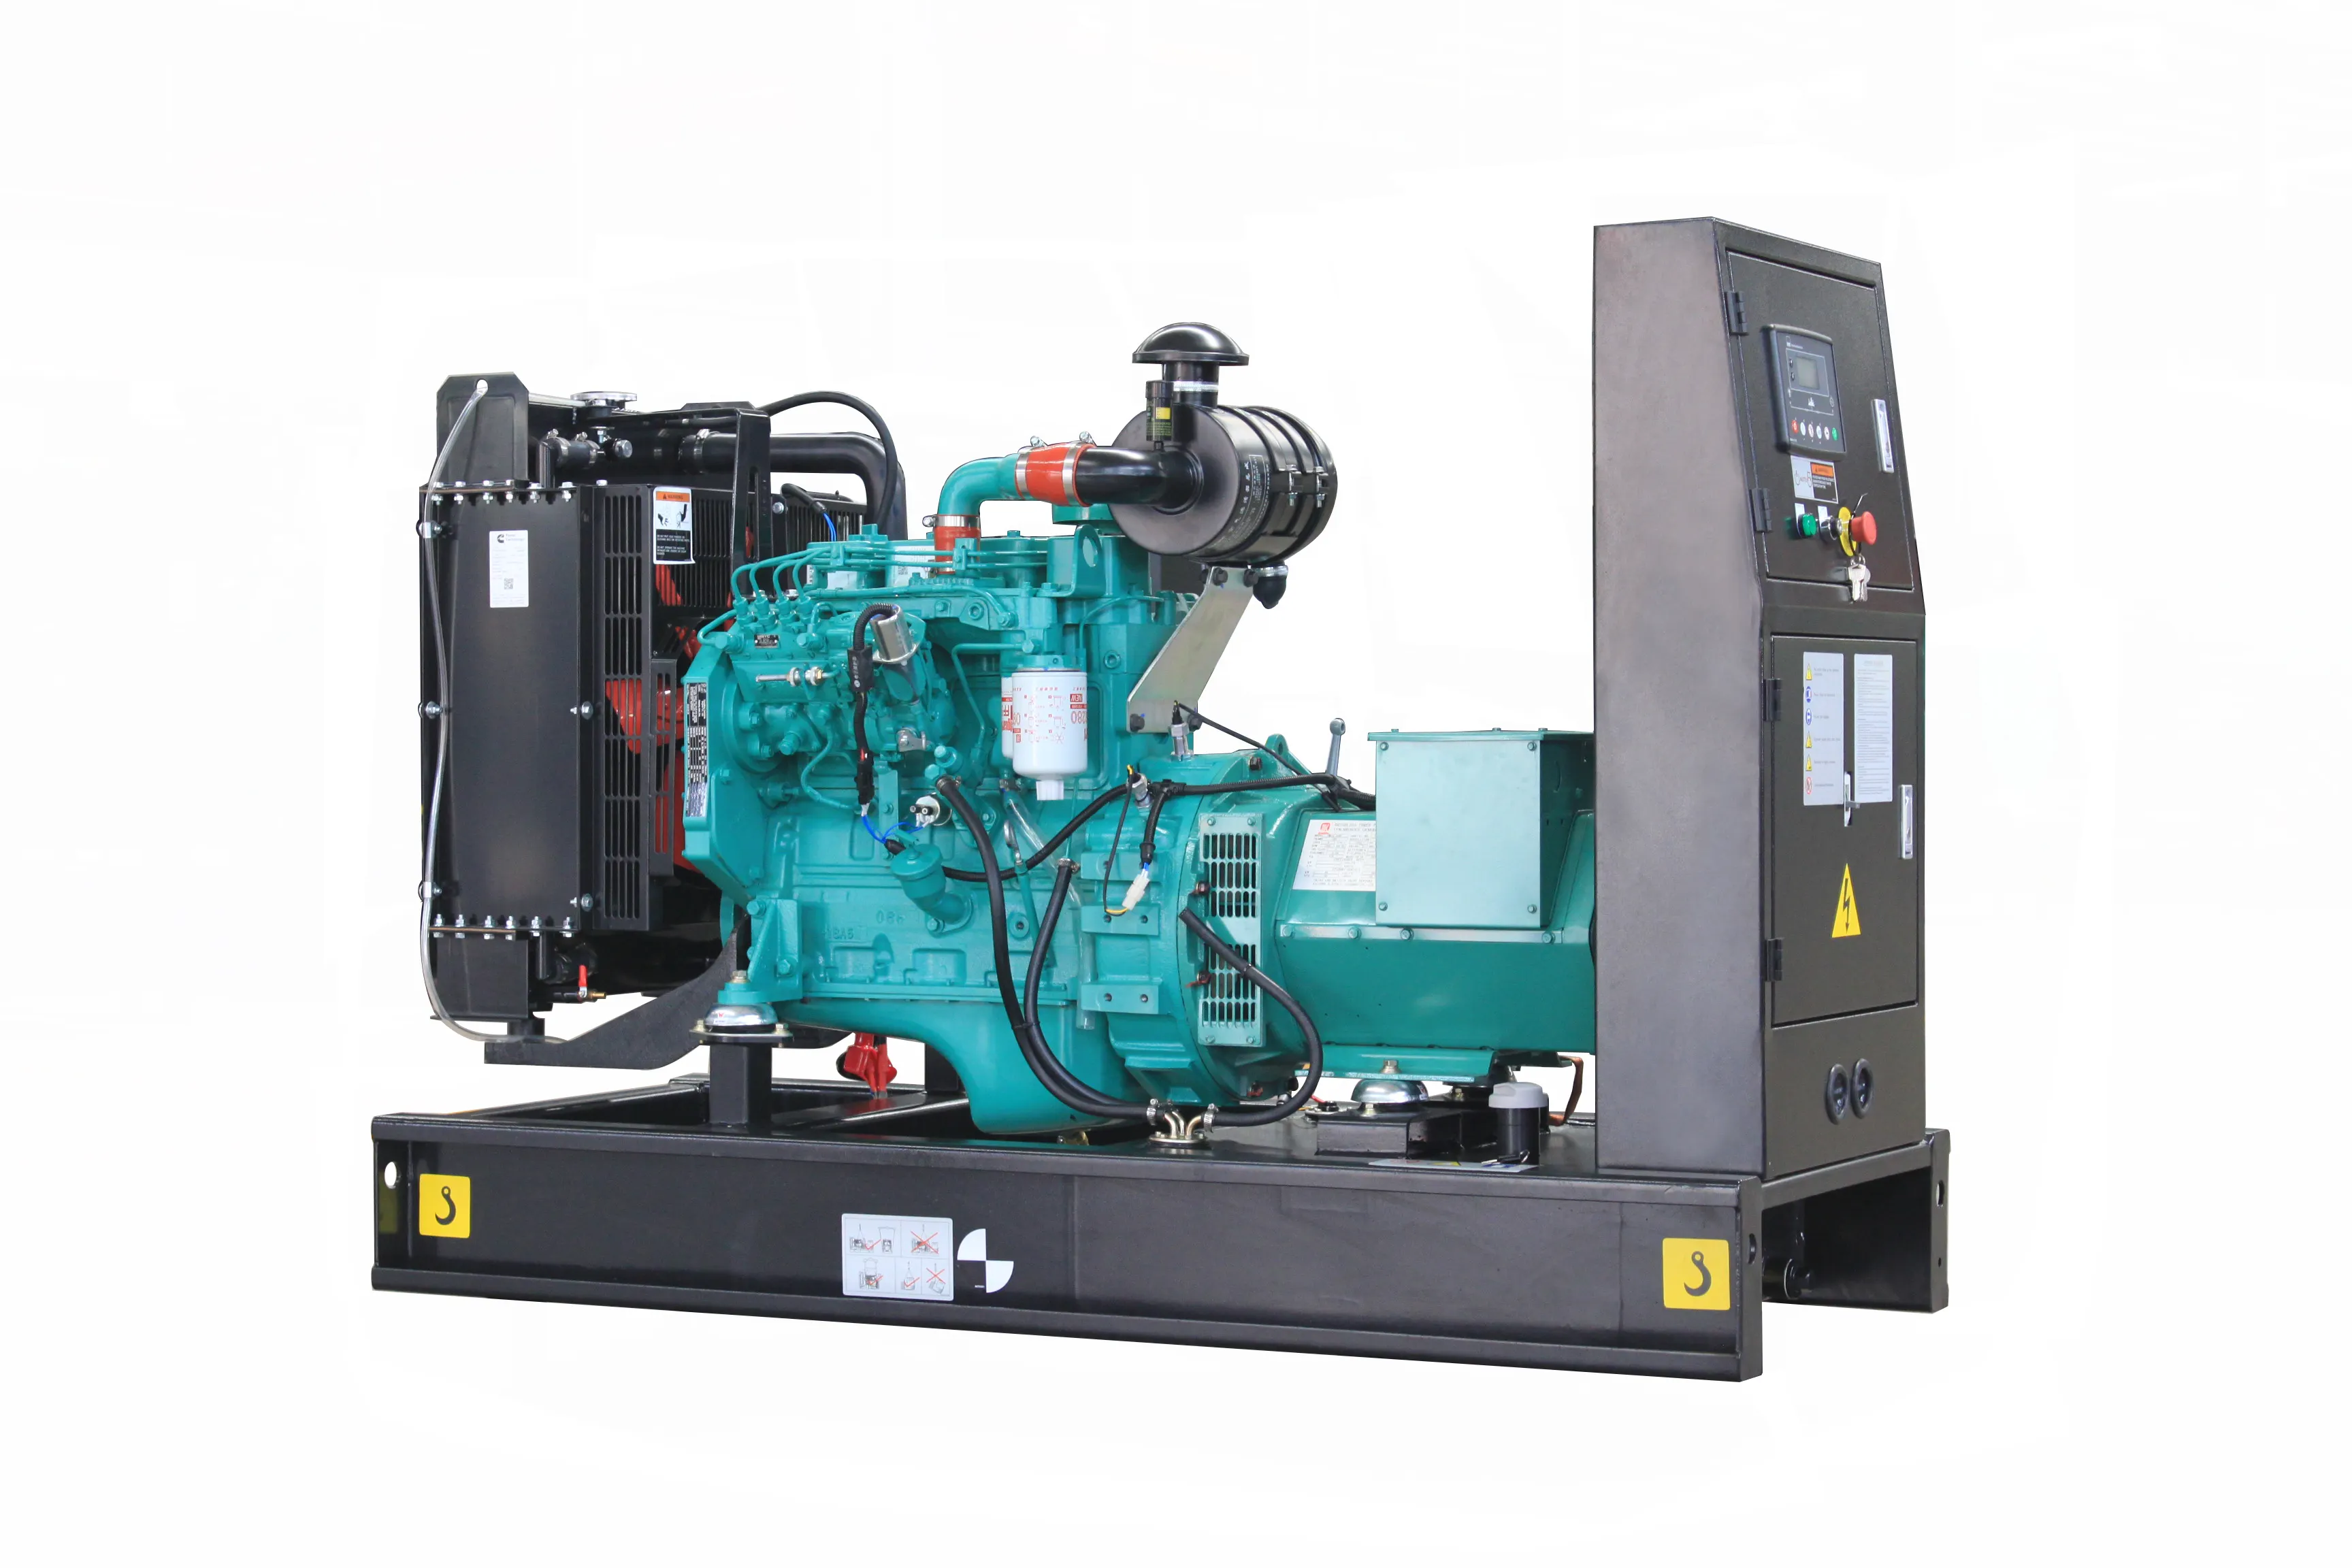 China Factory Price Standby Power 120kw 150kva Diesel Generator Set DCEC diesel groupe electrogene silencieuse